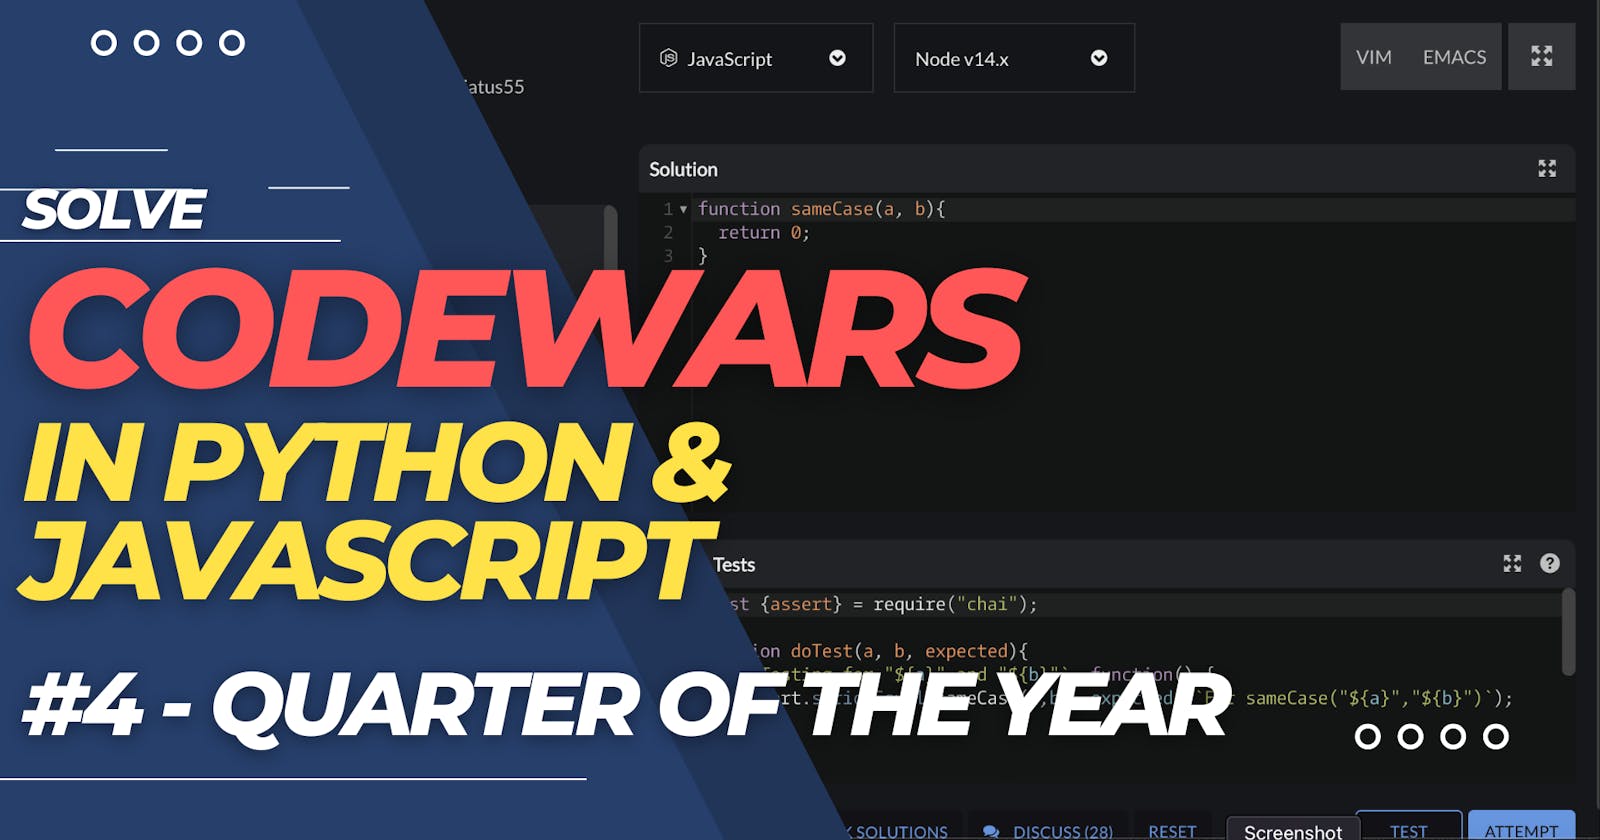 CODEWARS #4 - Quarter of the year (solved in Python & Javascript)